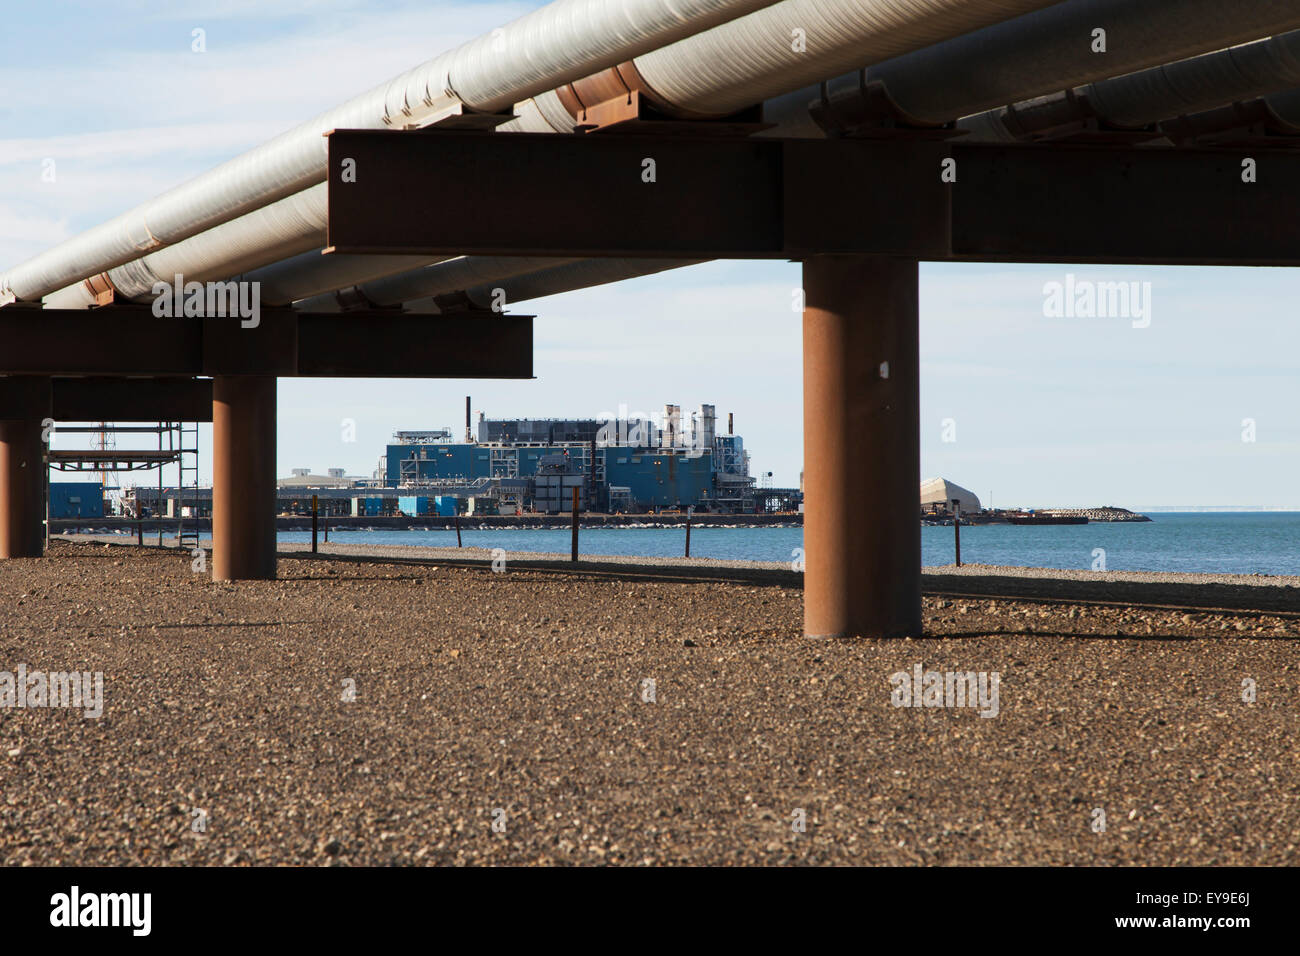 Endicott oil facility with pipelines in the Prudhoe Bay Oil field, North Slope, Arctic Alaska, Summer Stock Photo